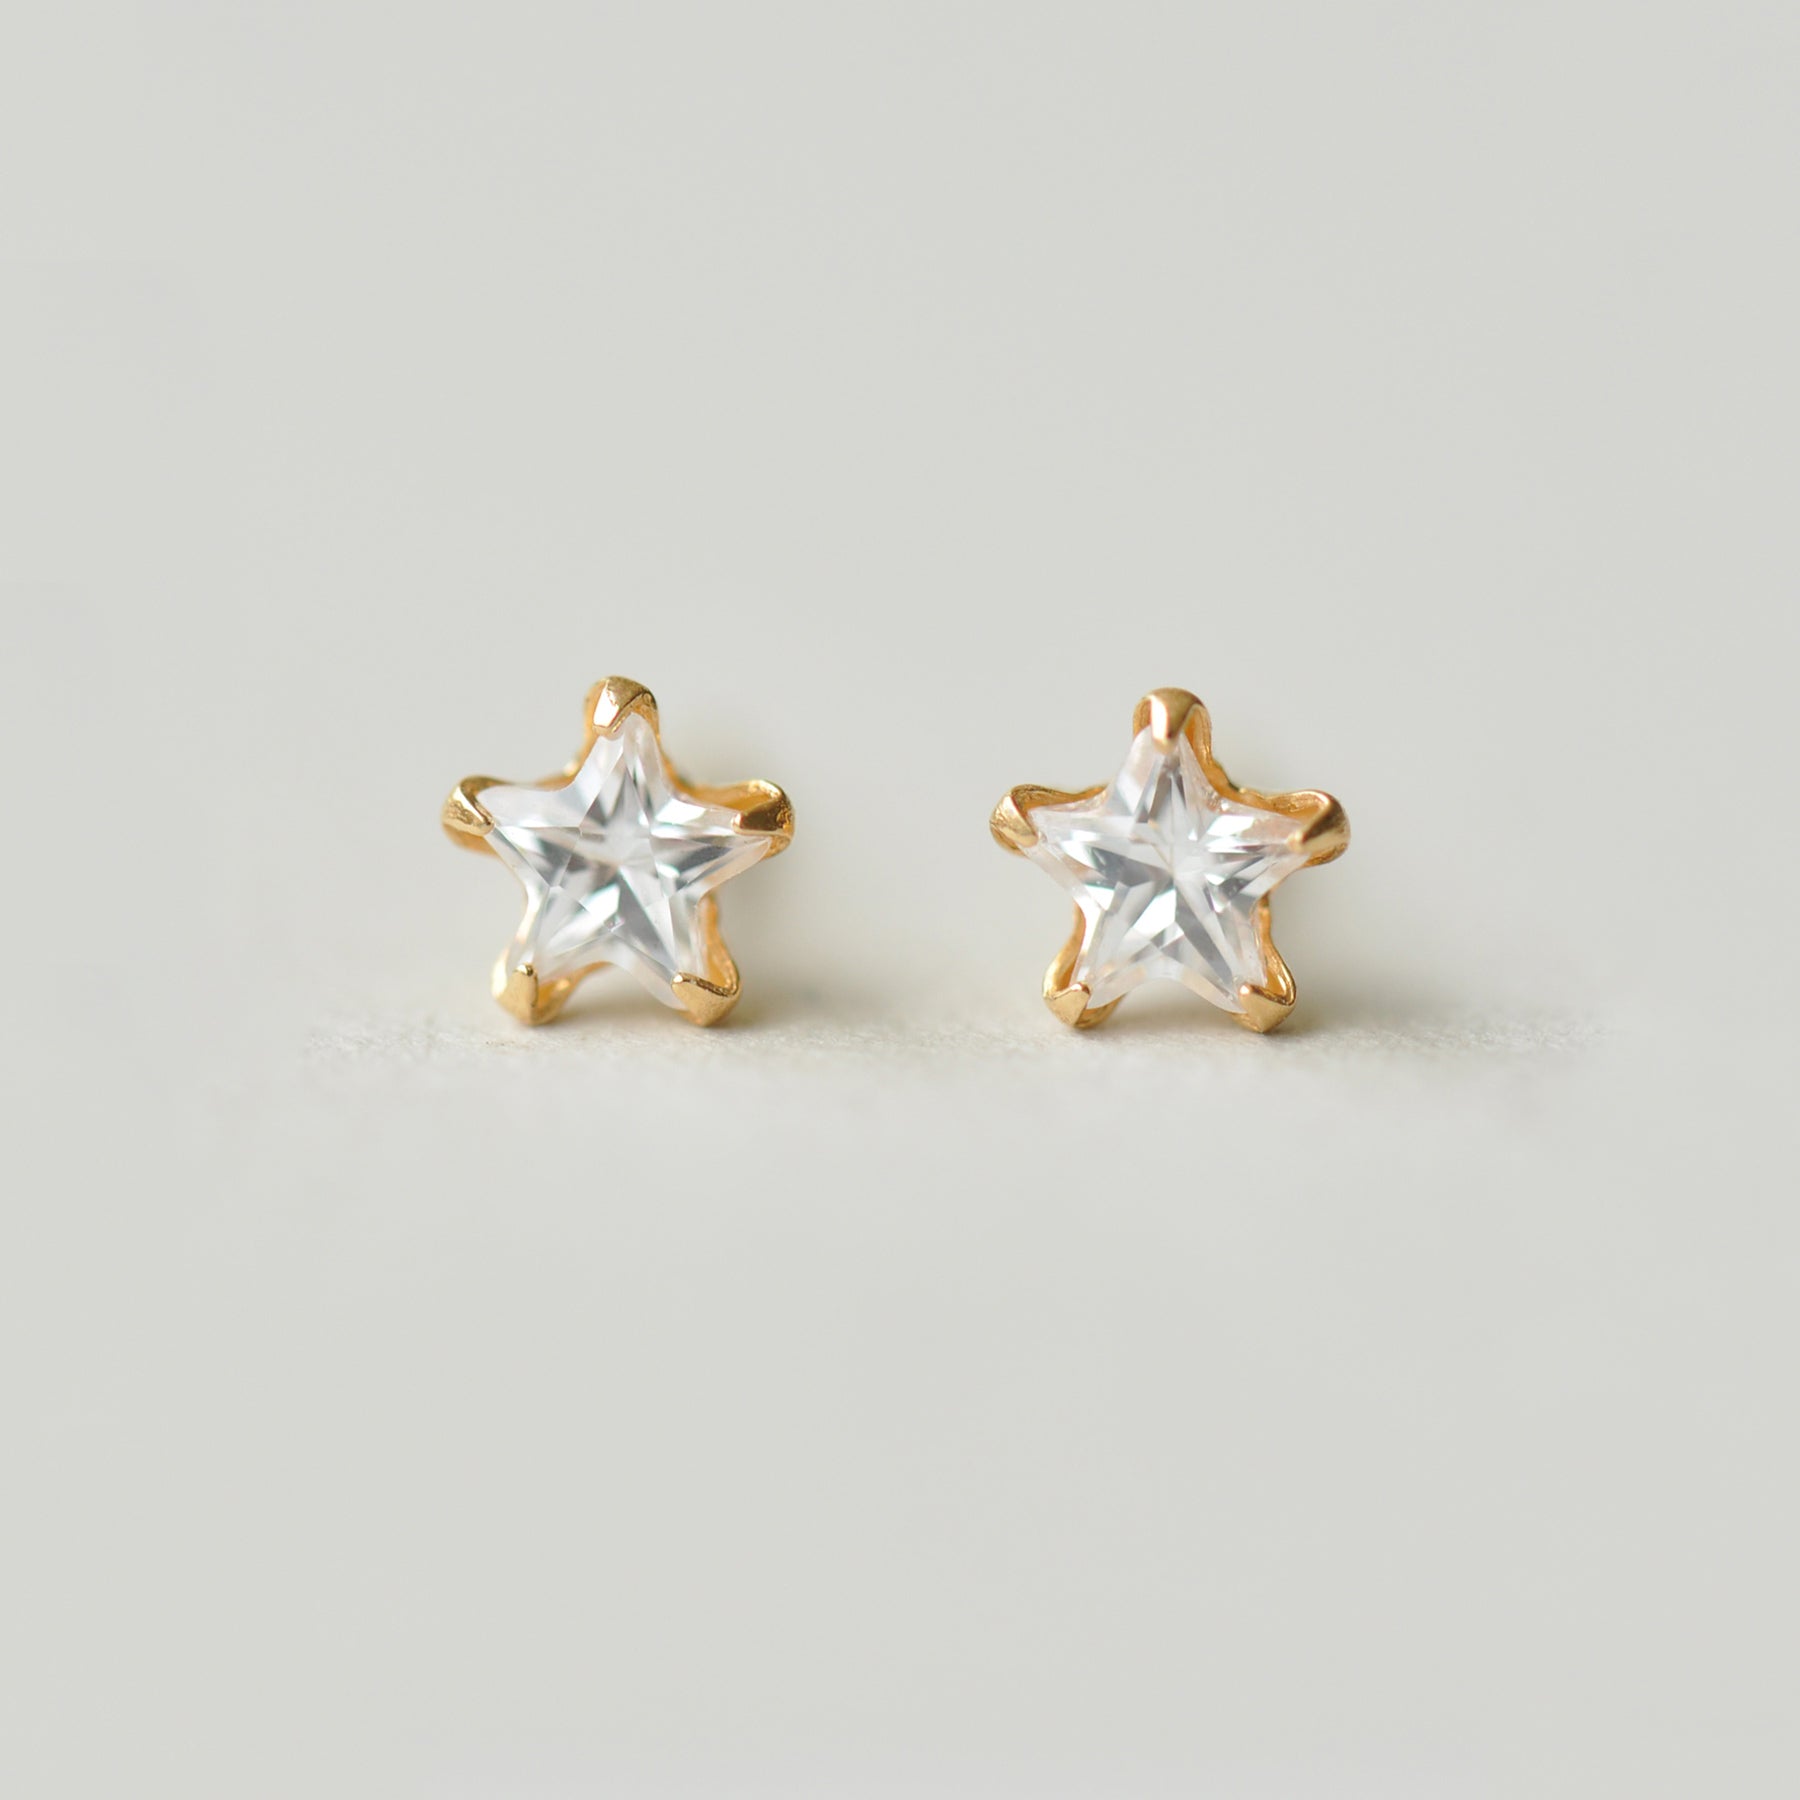 [Second Earrings] 18K Yellow Gold Star Cut Clear Cubic Zirconia Earrings - Product Image